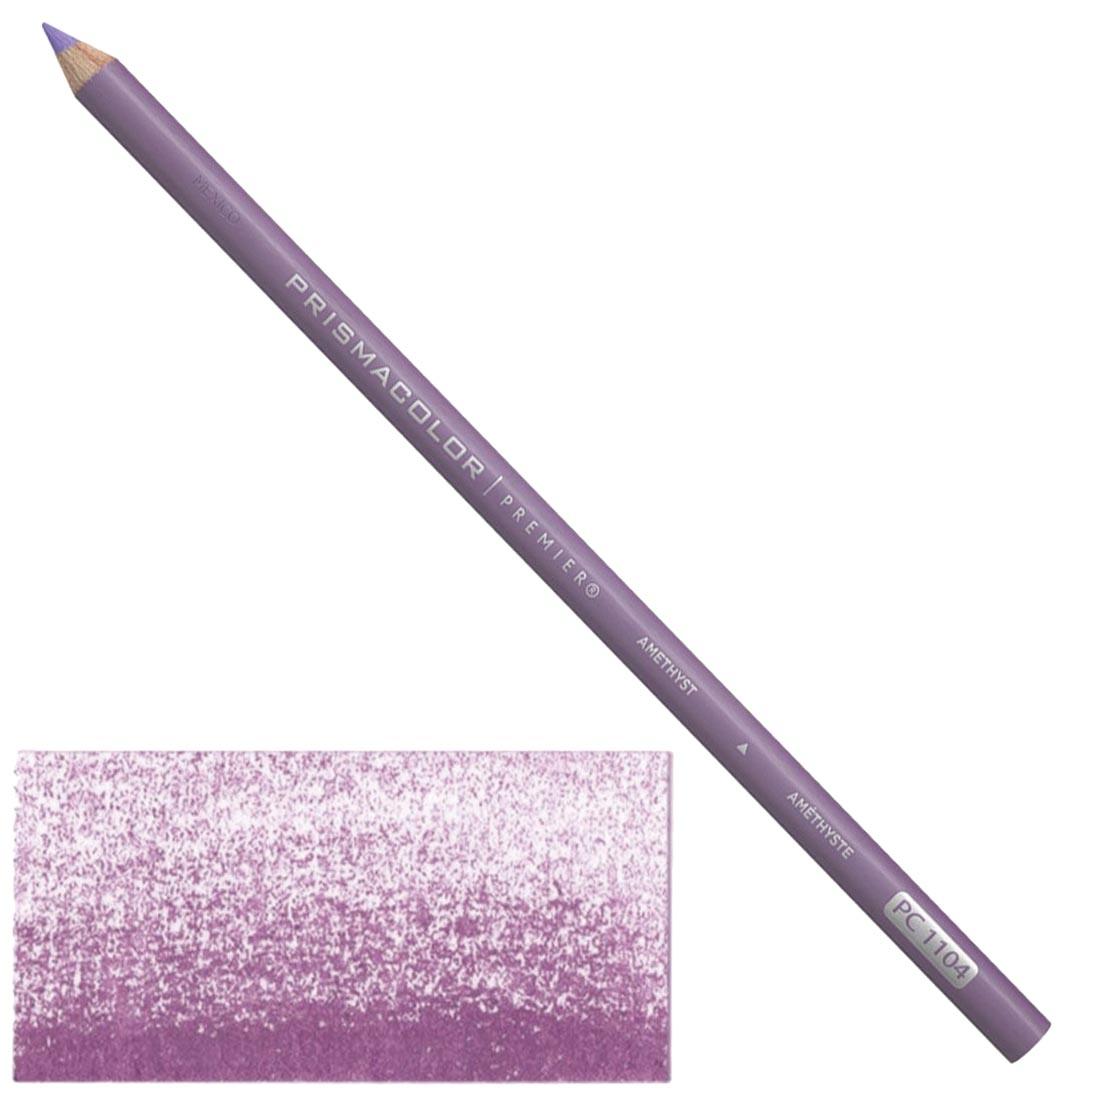 Amethyst Prismacolor Premier Colored Pencil with a sample colored swatch